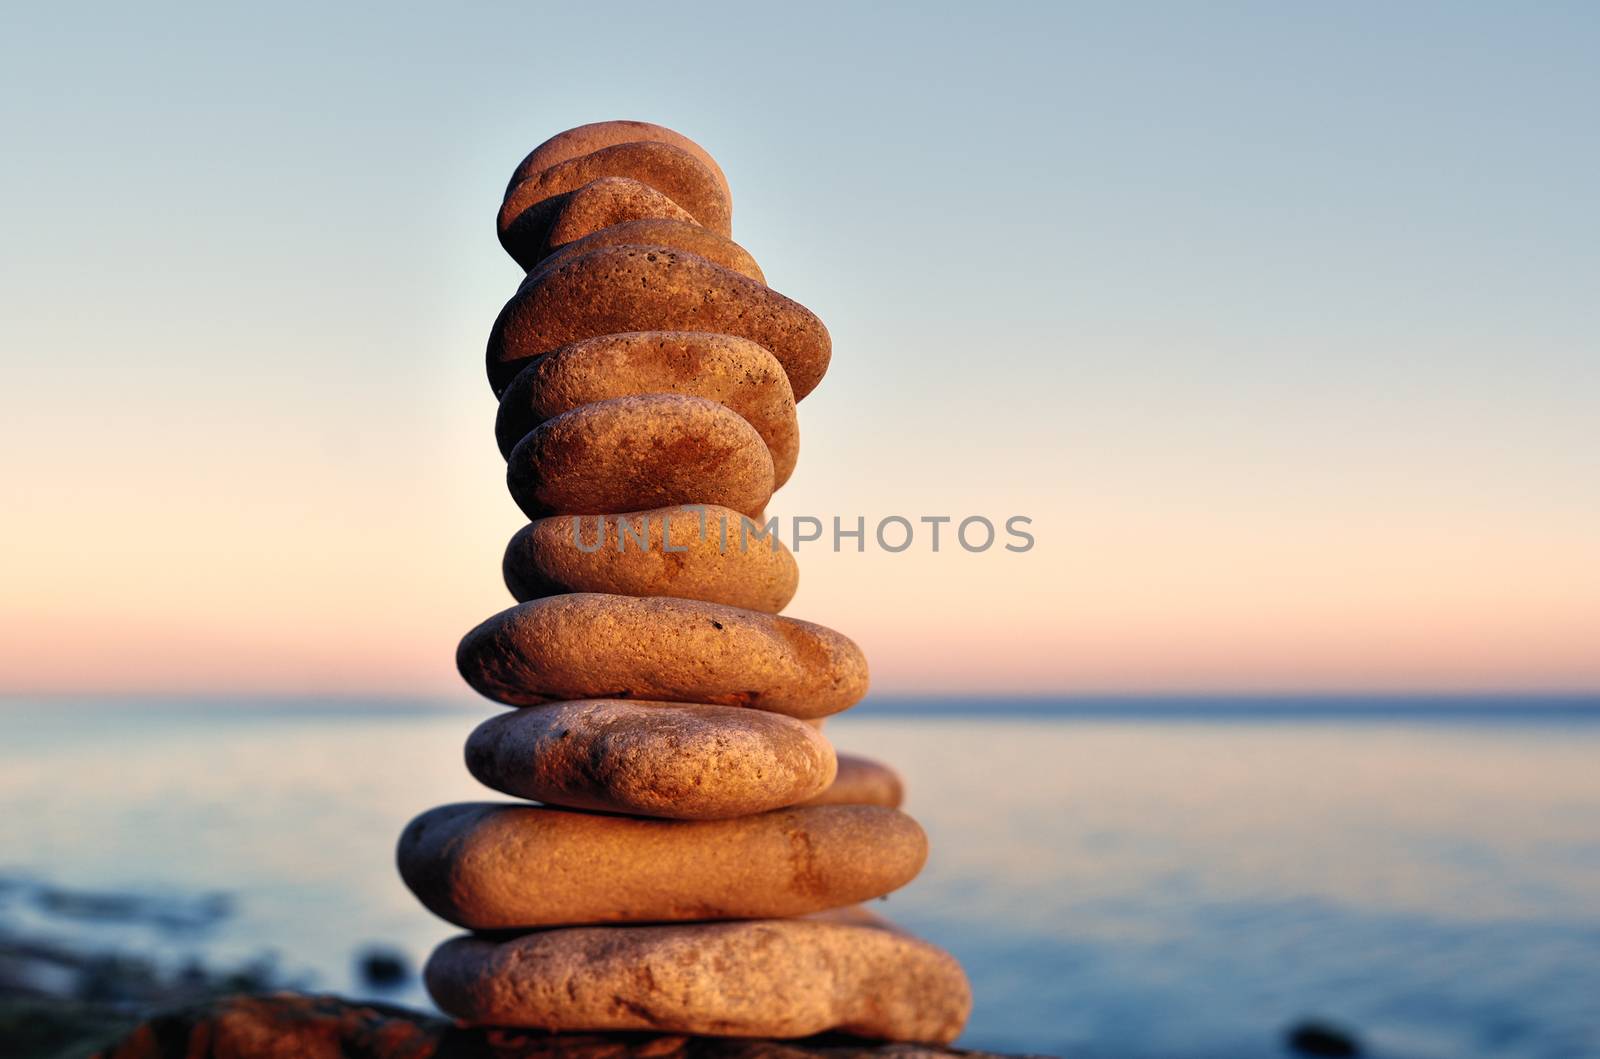 Stones in balance by styf22